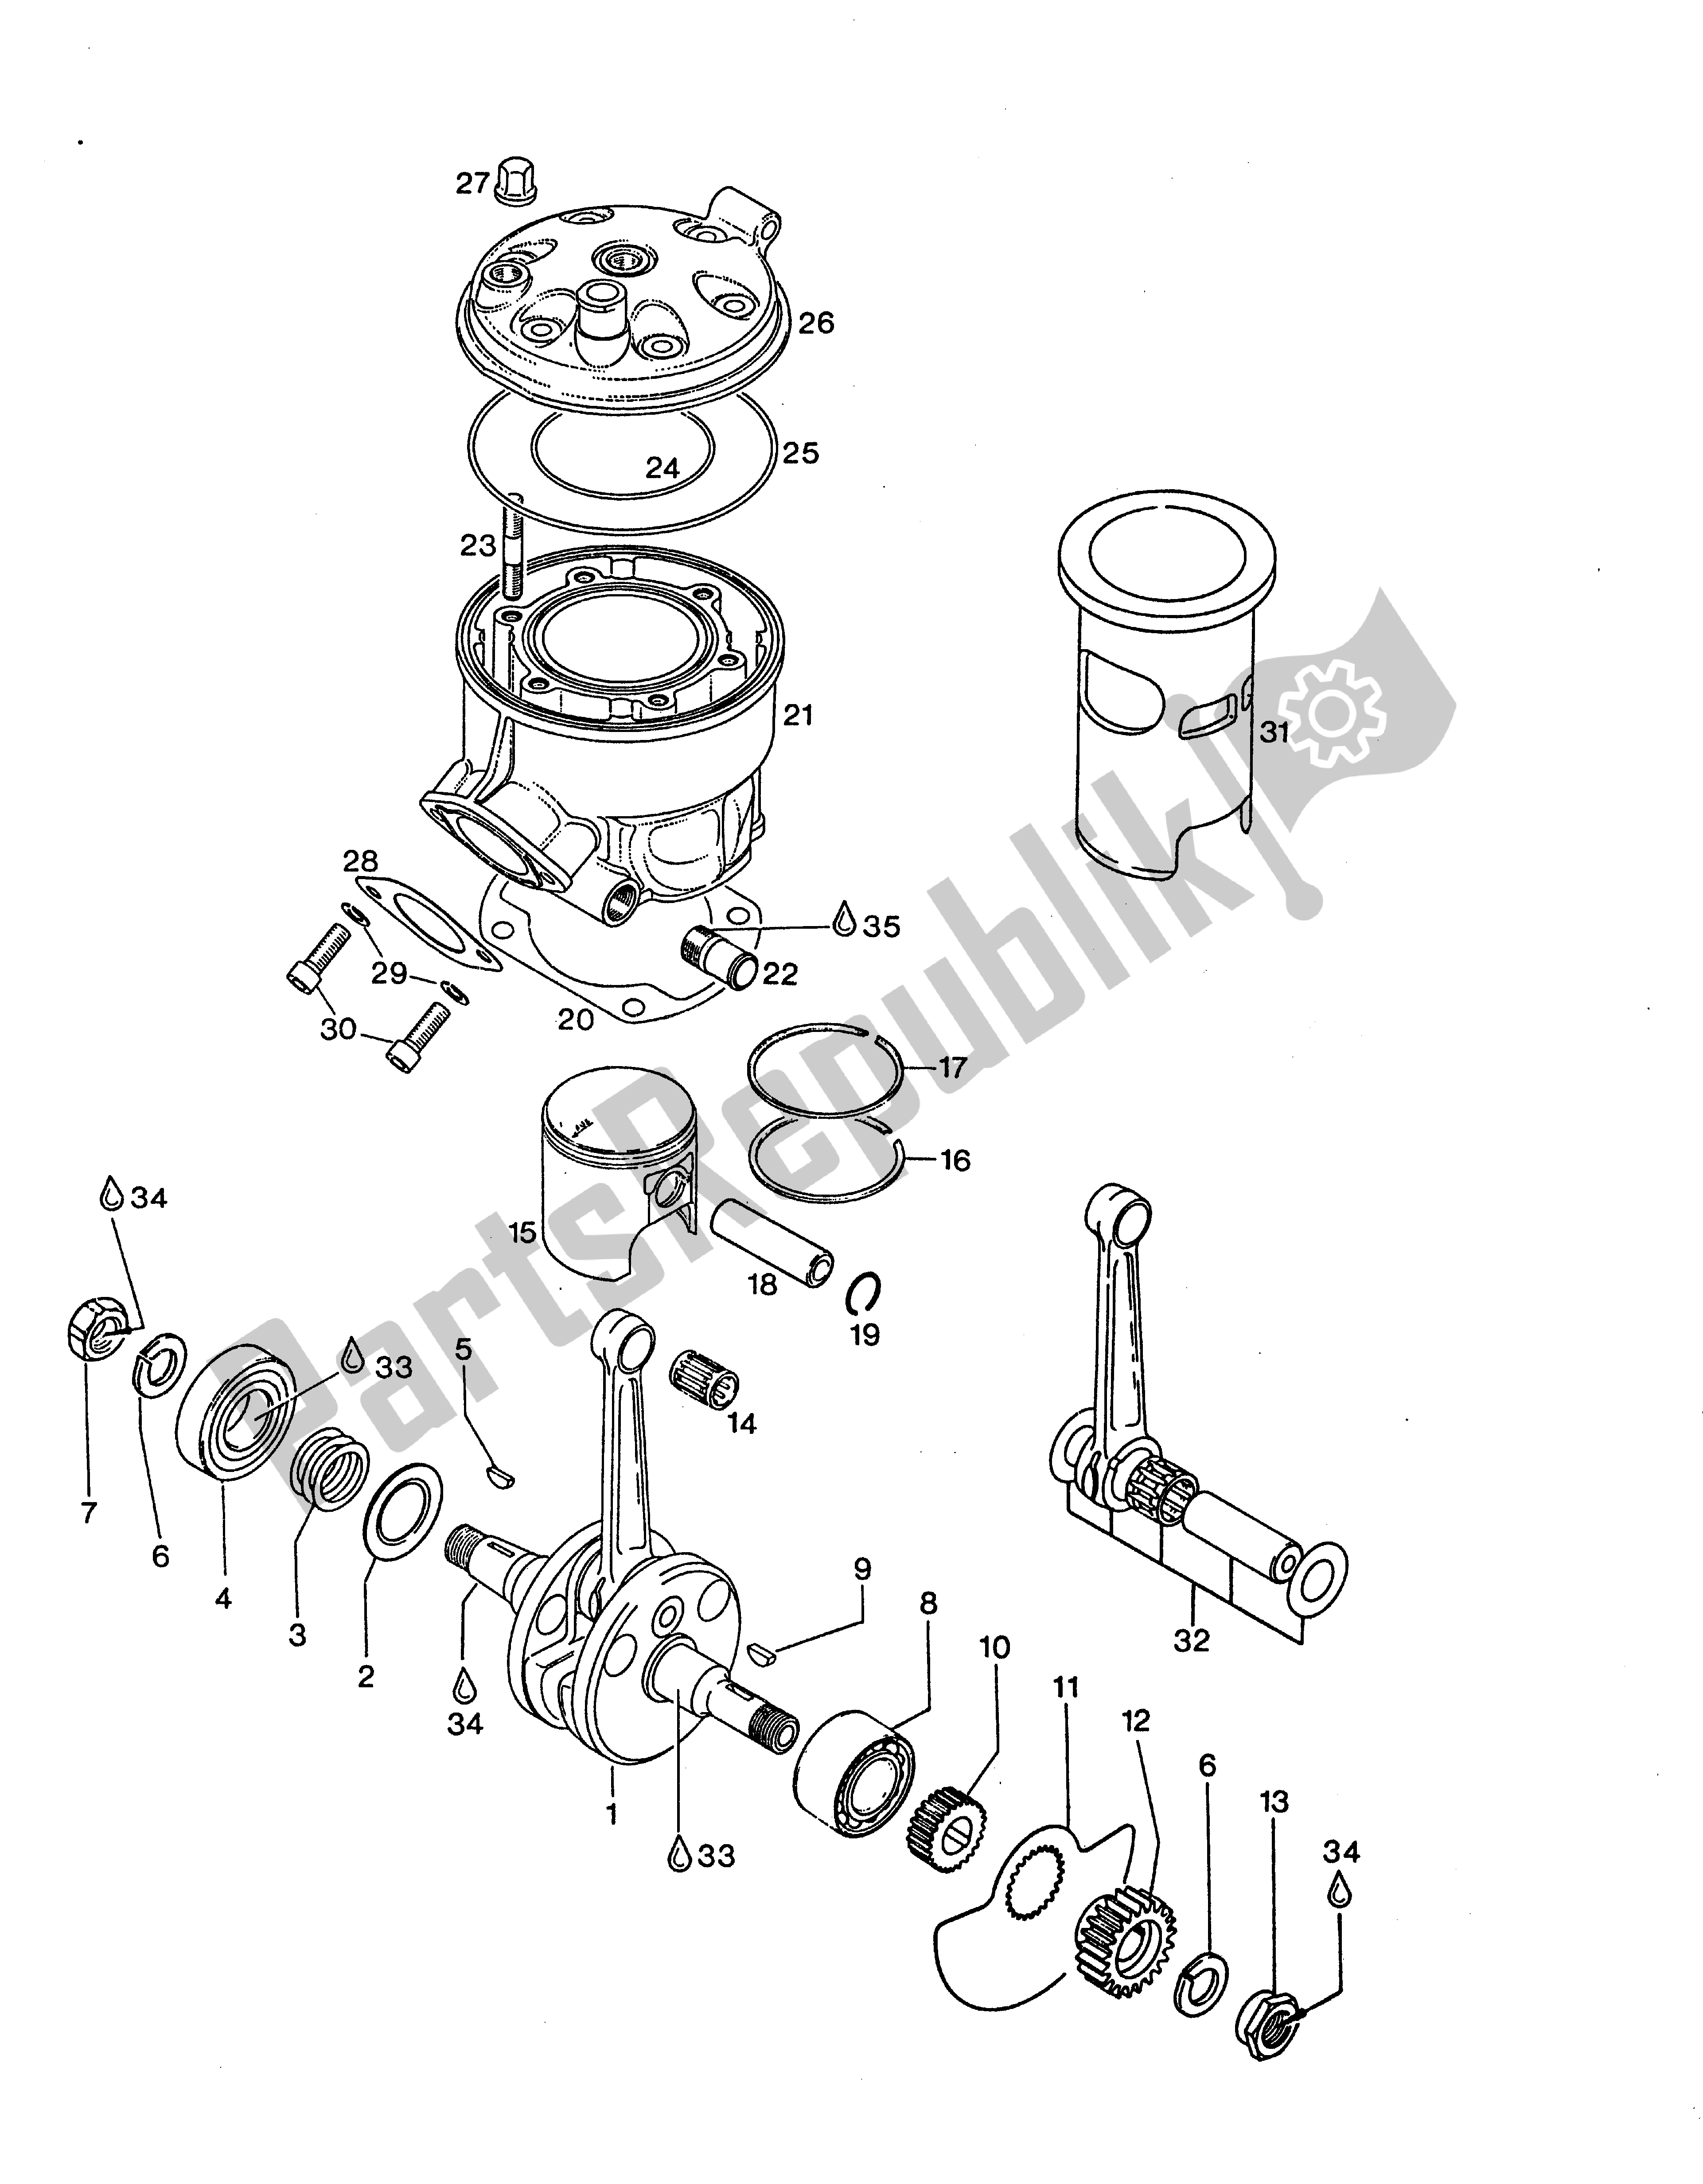 All parts for the Crankshaft, Piston, Cylinder, Cylinder Head of the Aprilia Climber 280 1990